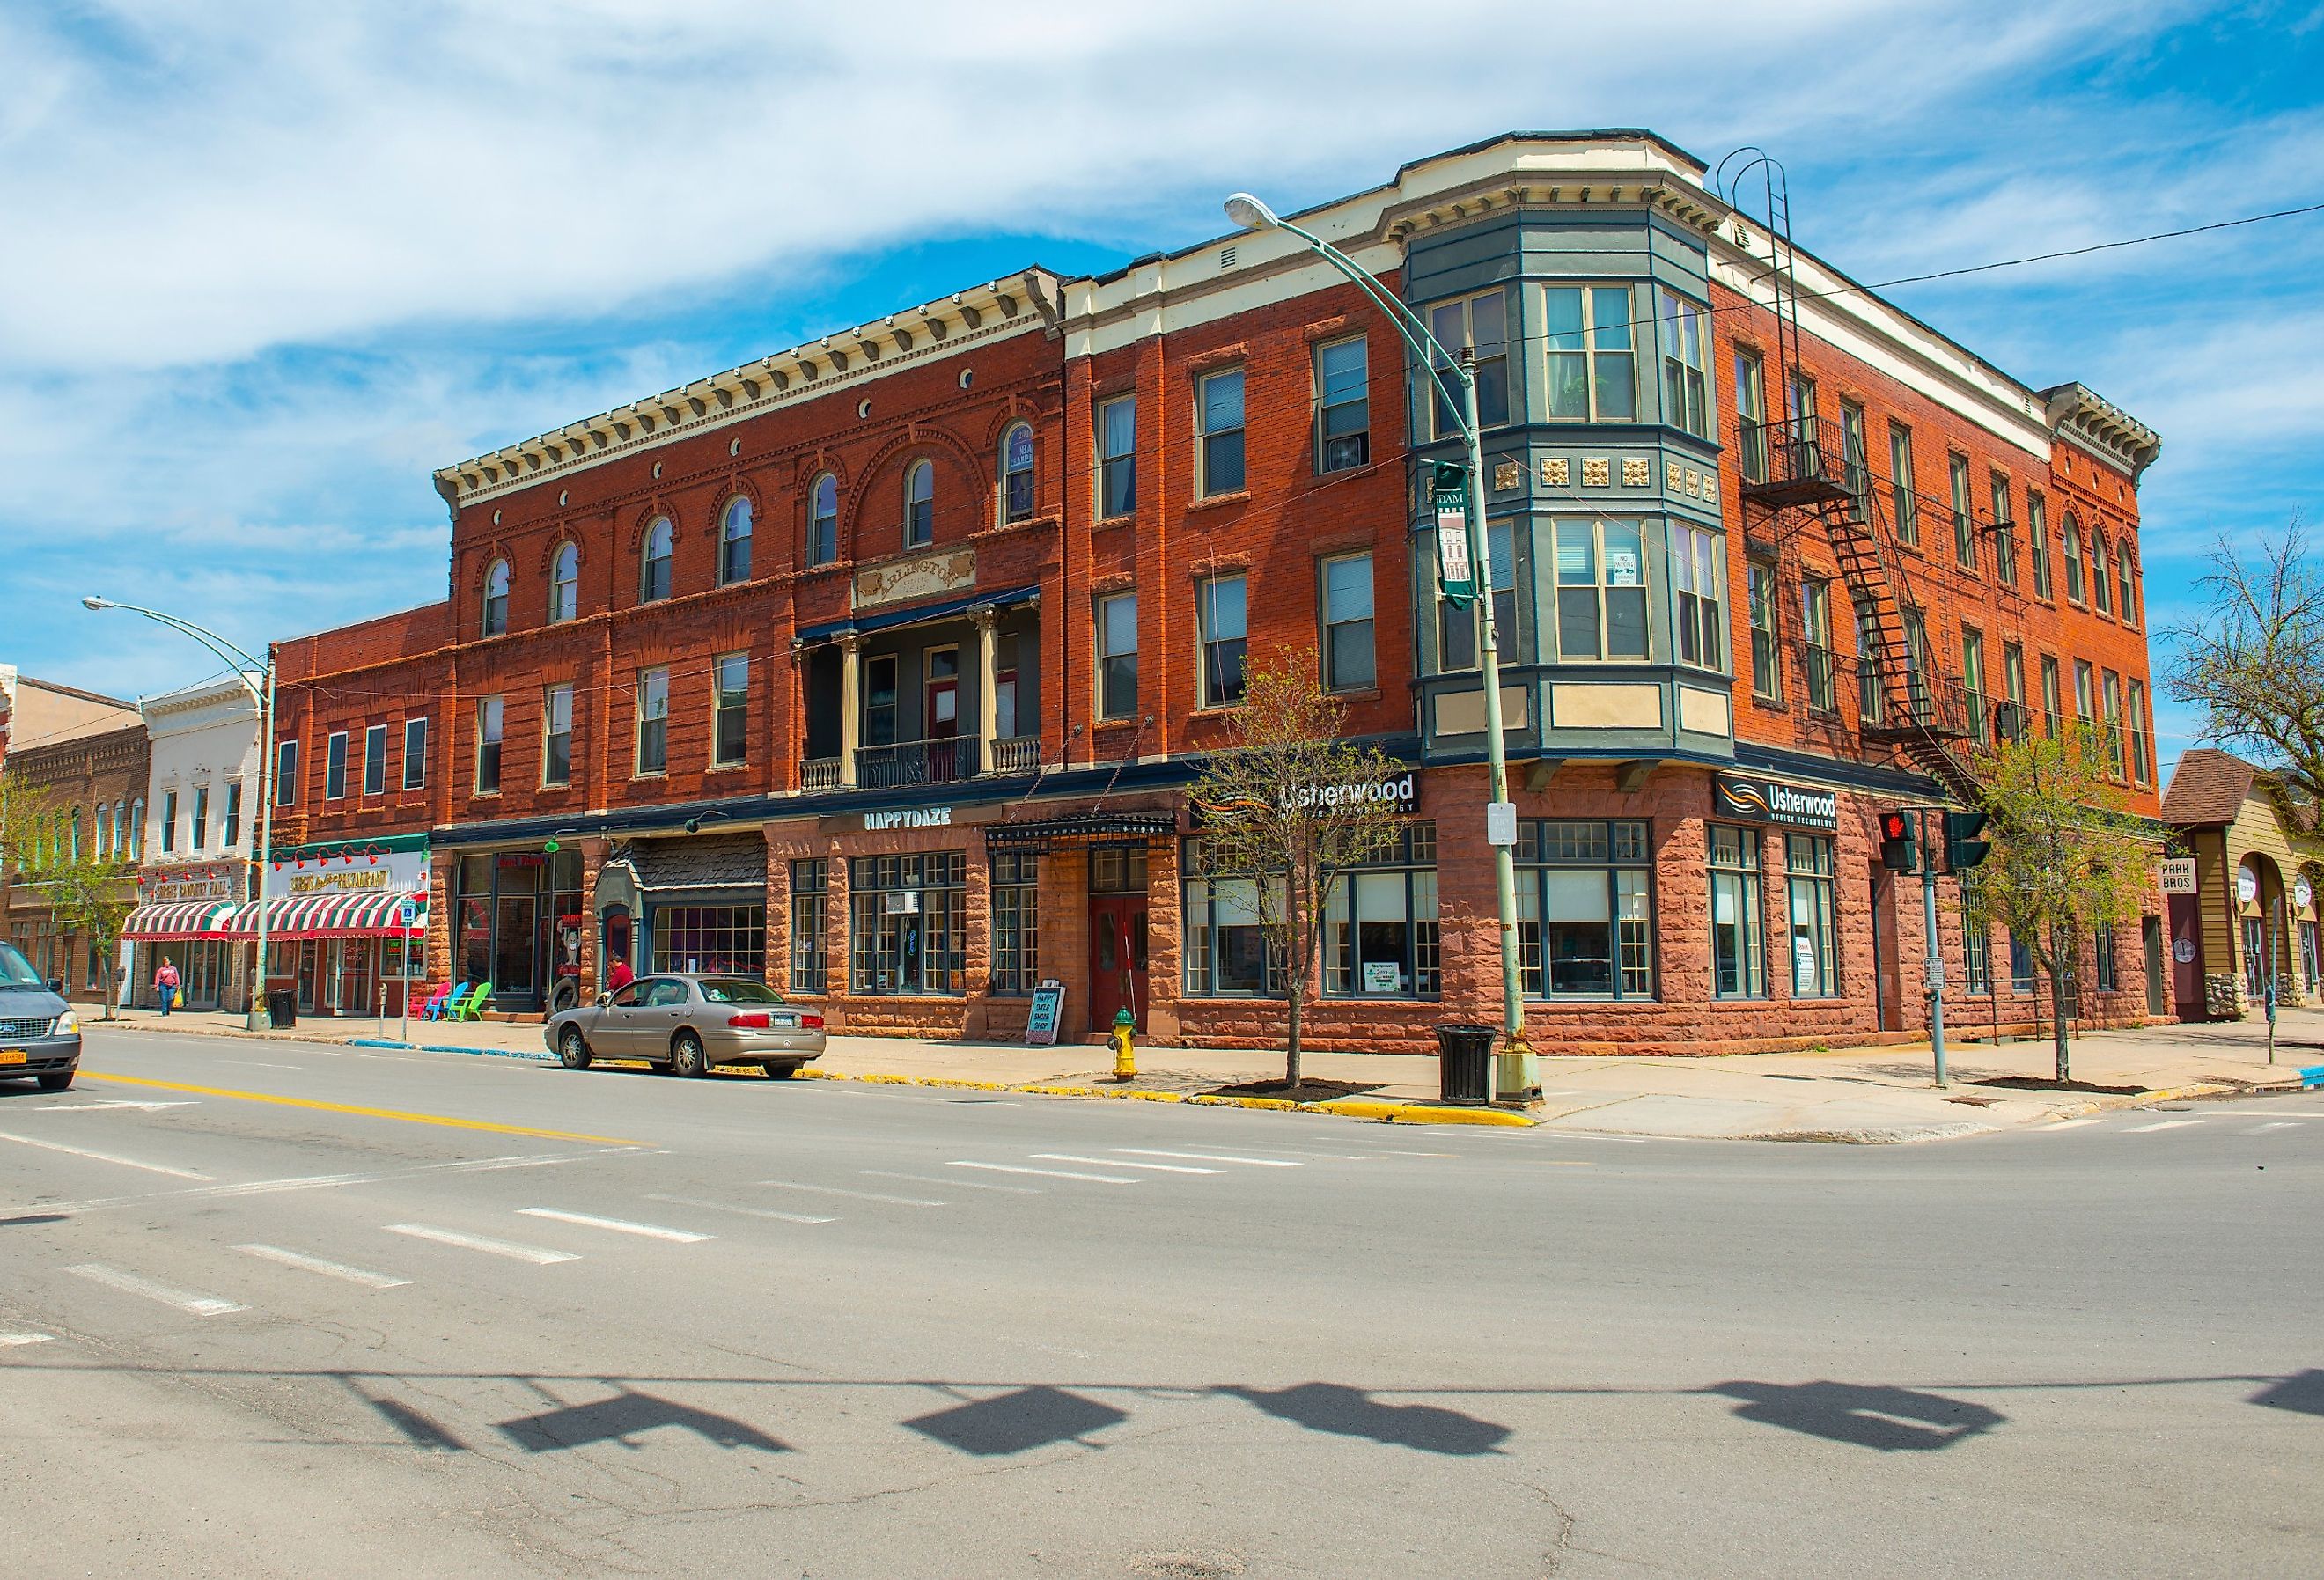 Historic sandstone and brick commercial buildings with Italianate style on Market Street at Main Street in downtown Potsdam, Upstate New York. Image credit Wangkun Jia via Shutterstock